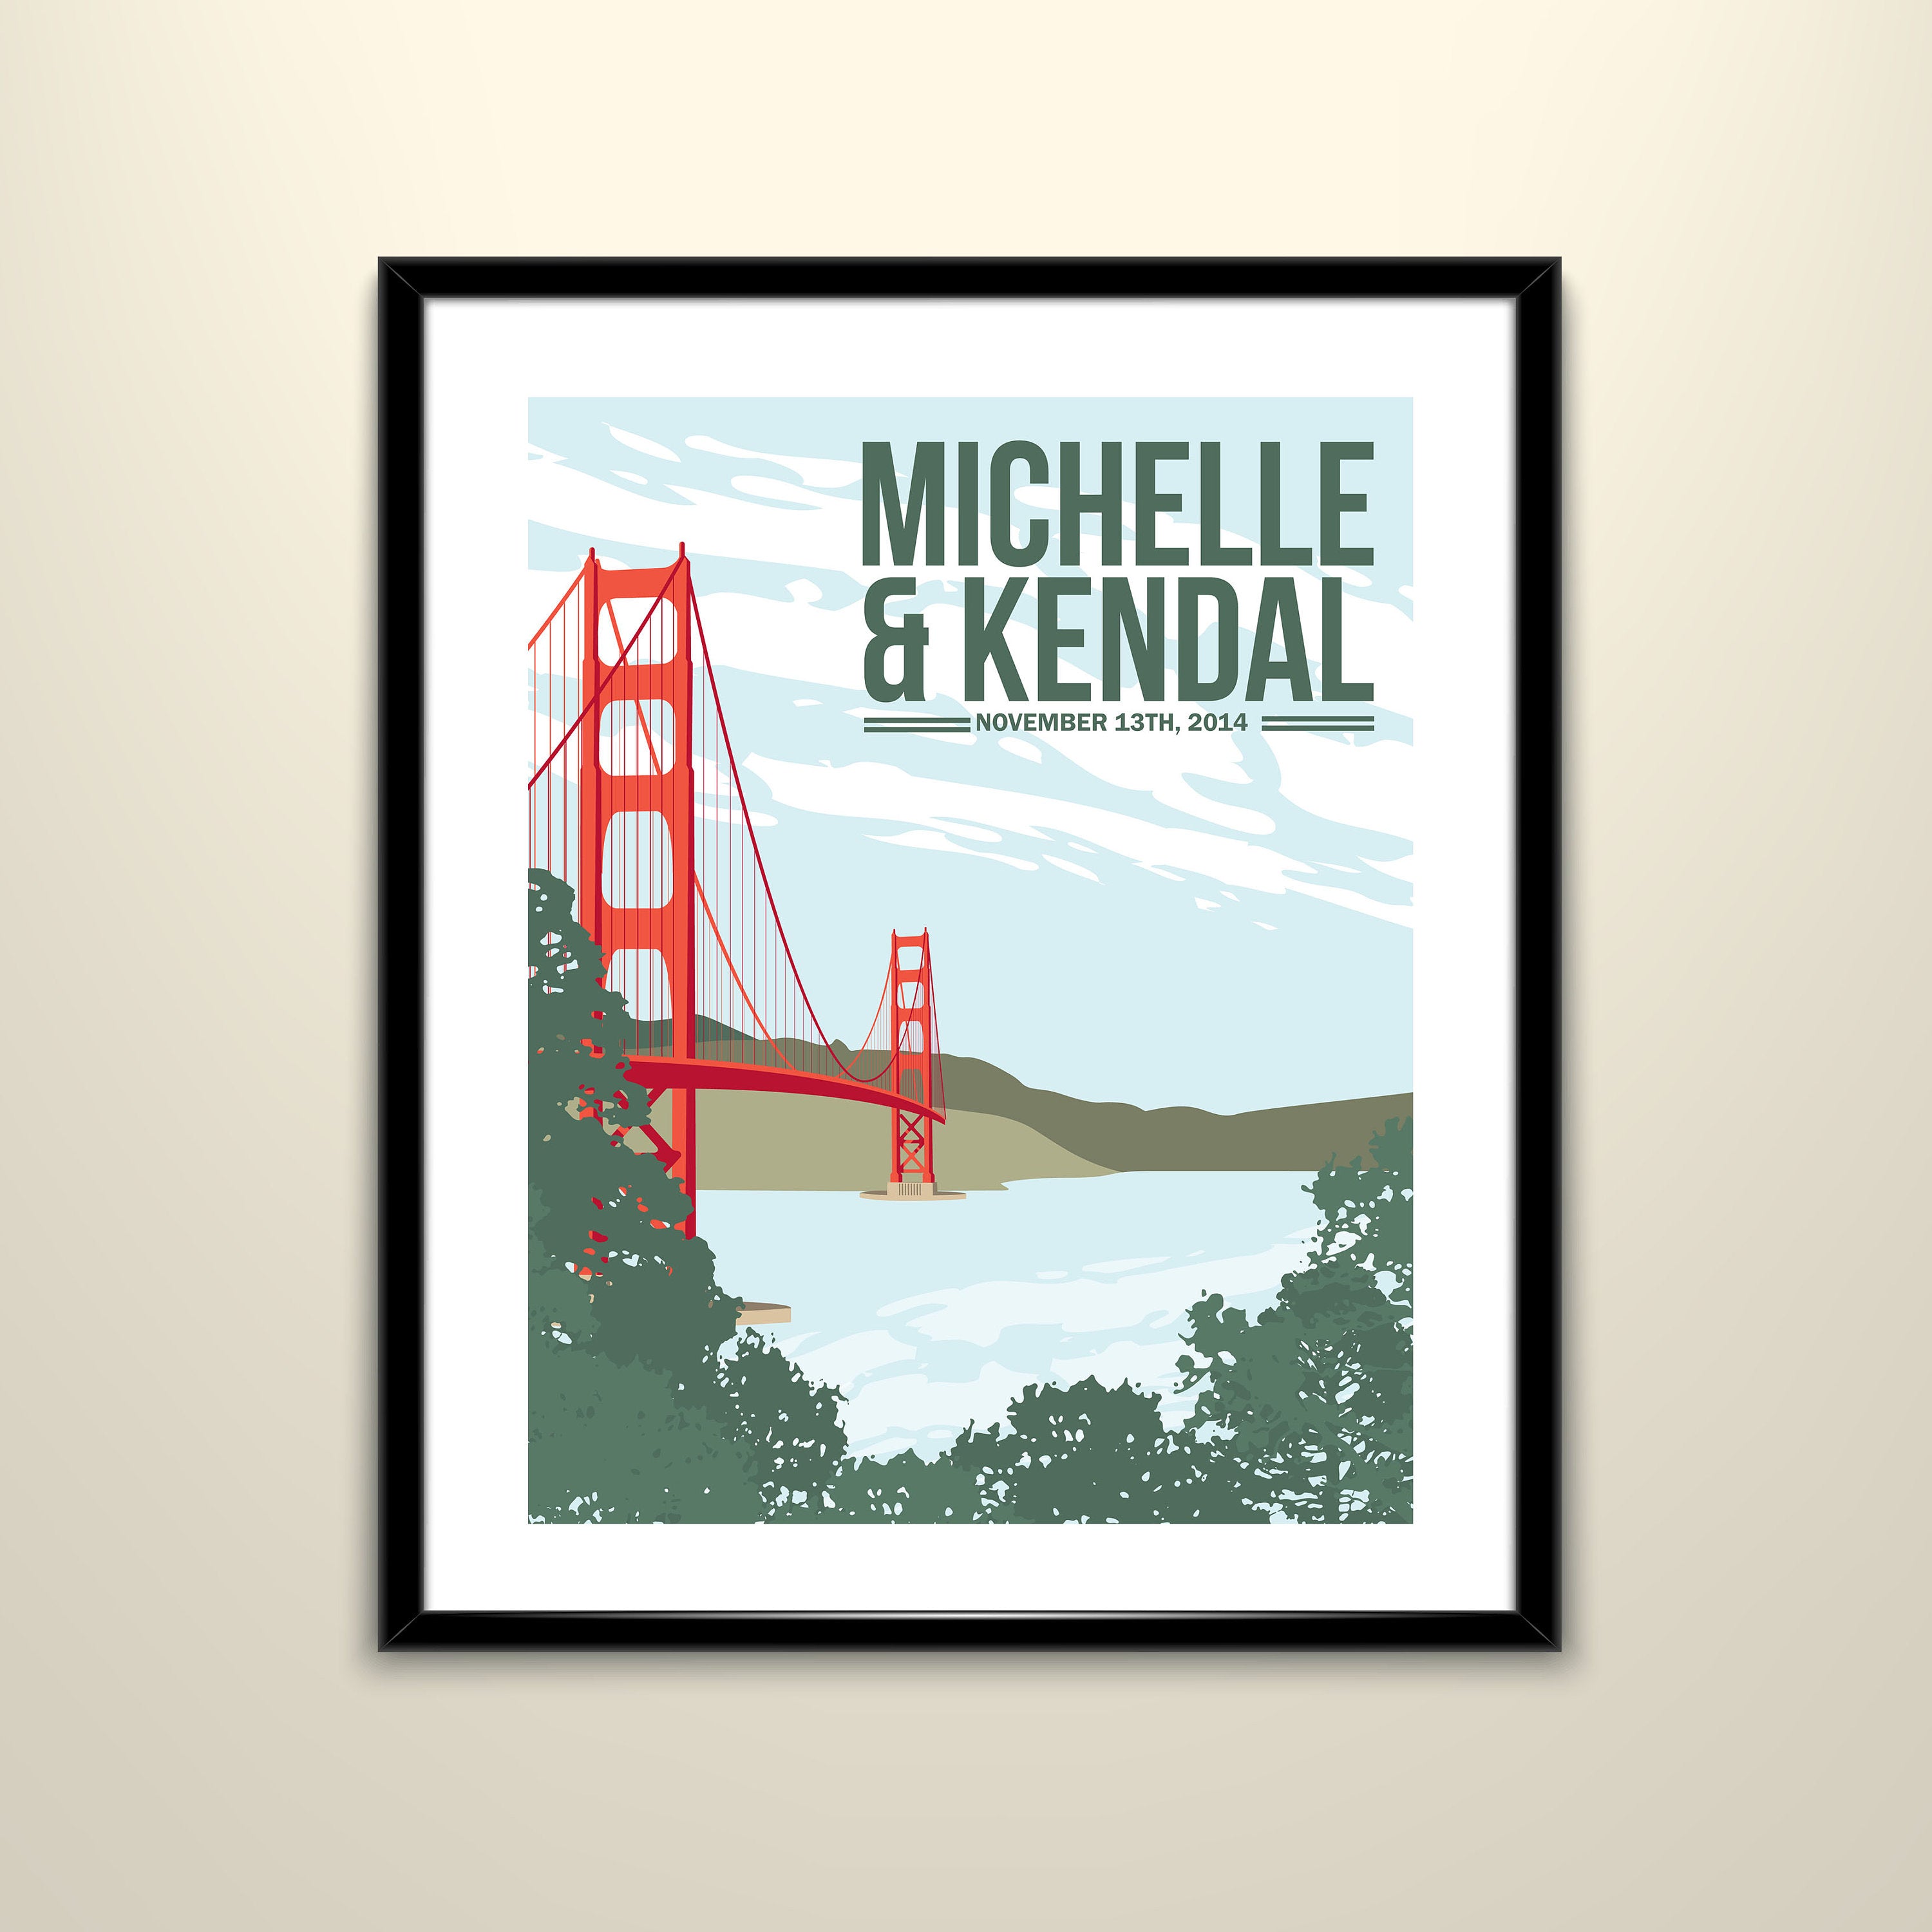 San Francisco Golden Gate Wedding Poster 11x14 Poster/Personalize with Names and wedding date (frame not included)